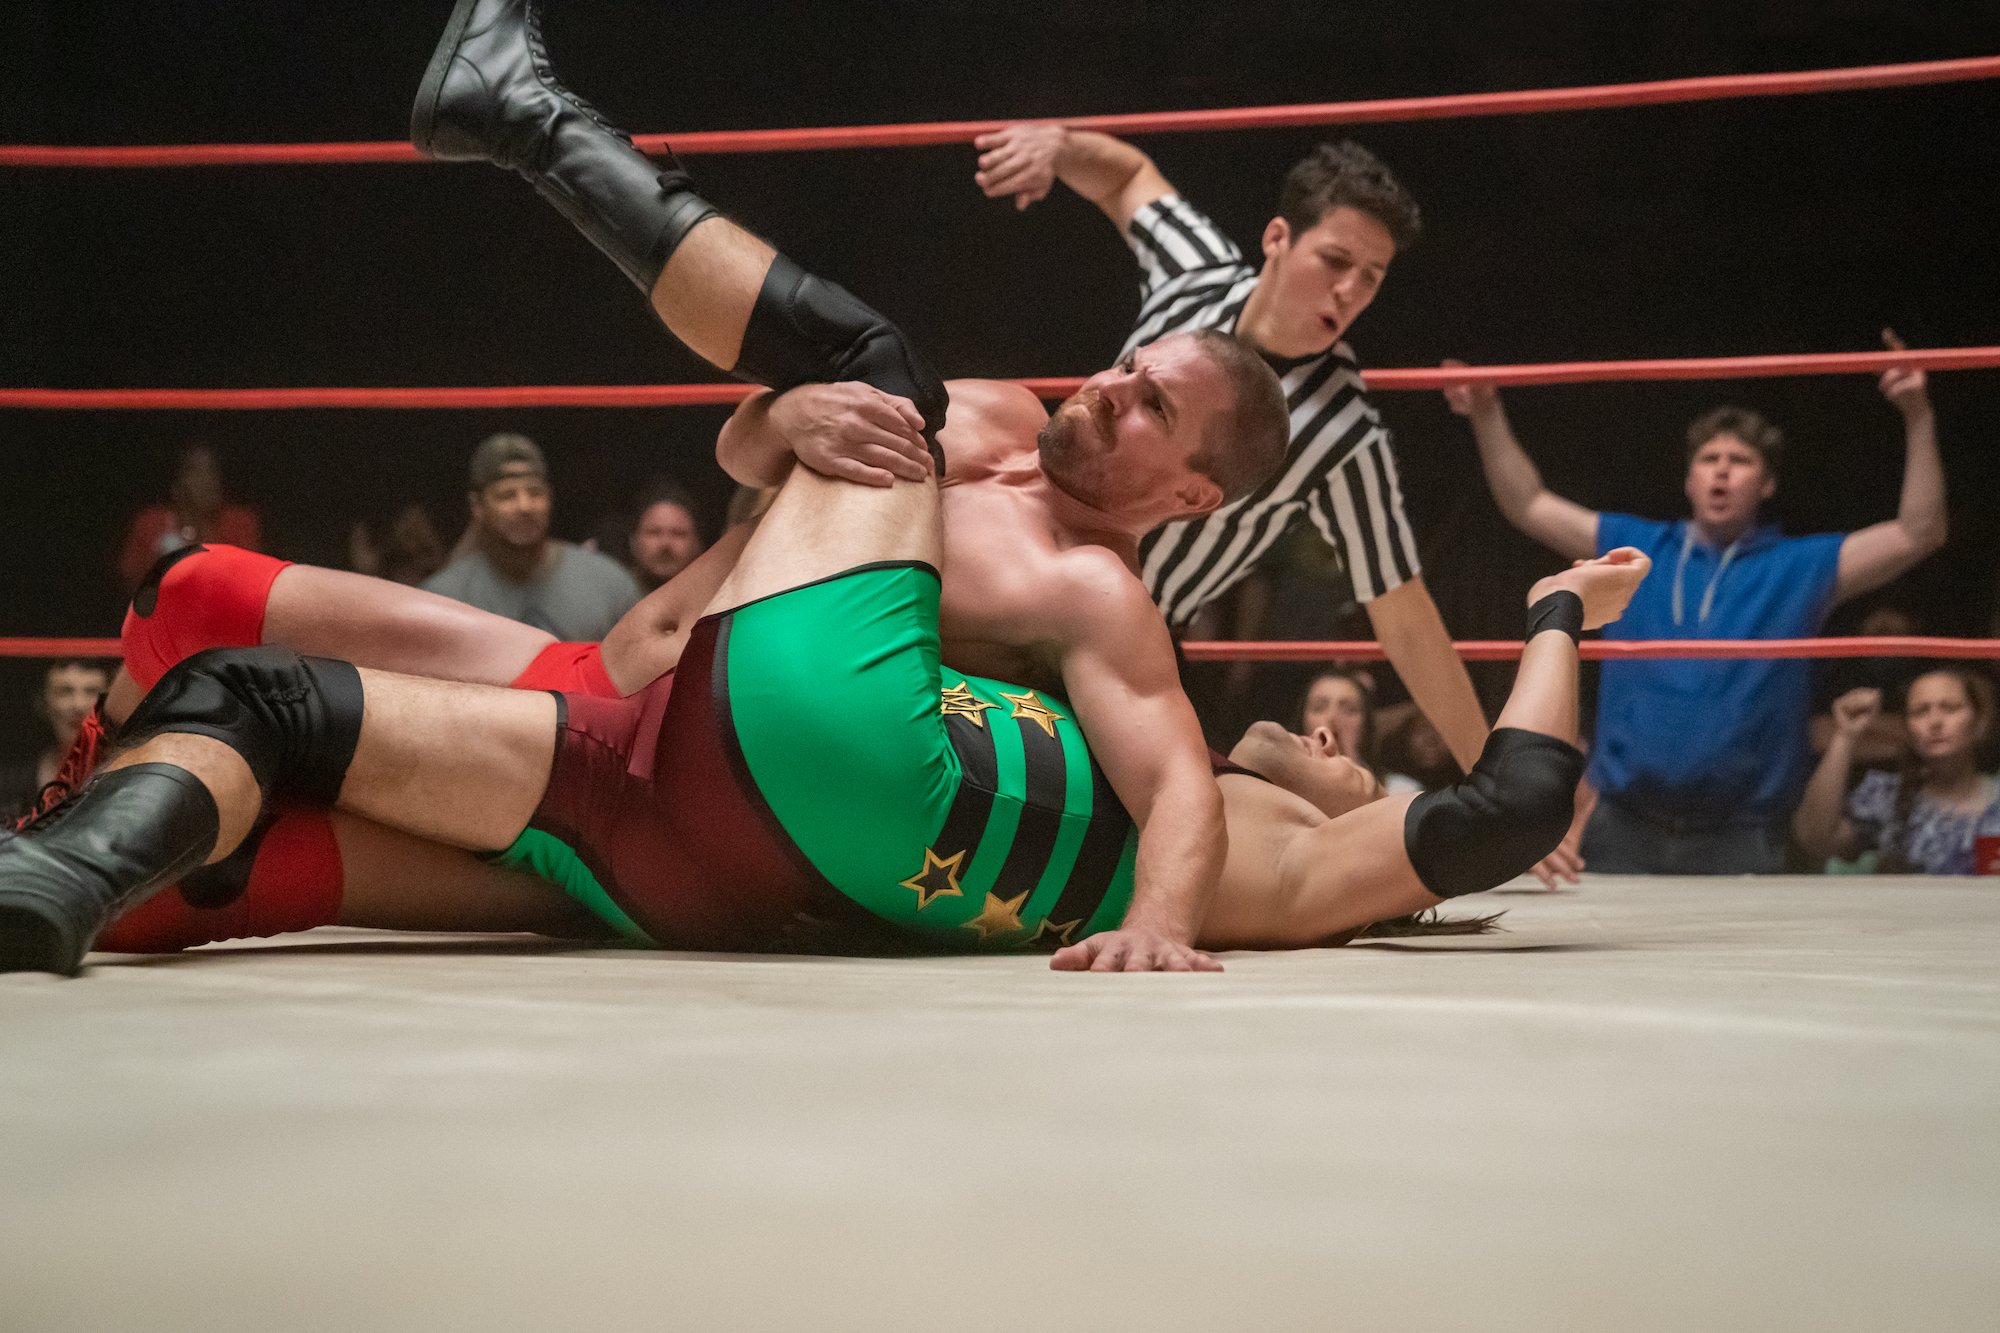 Stephen Amell pins his opponent in Heels